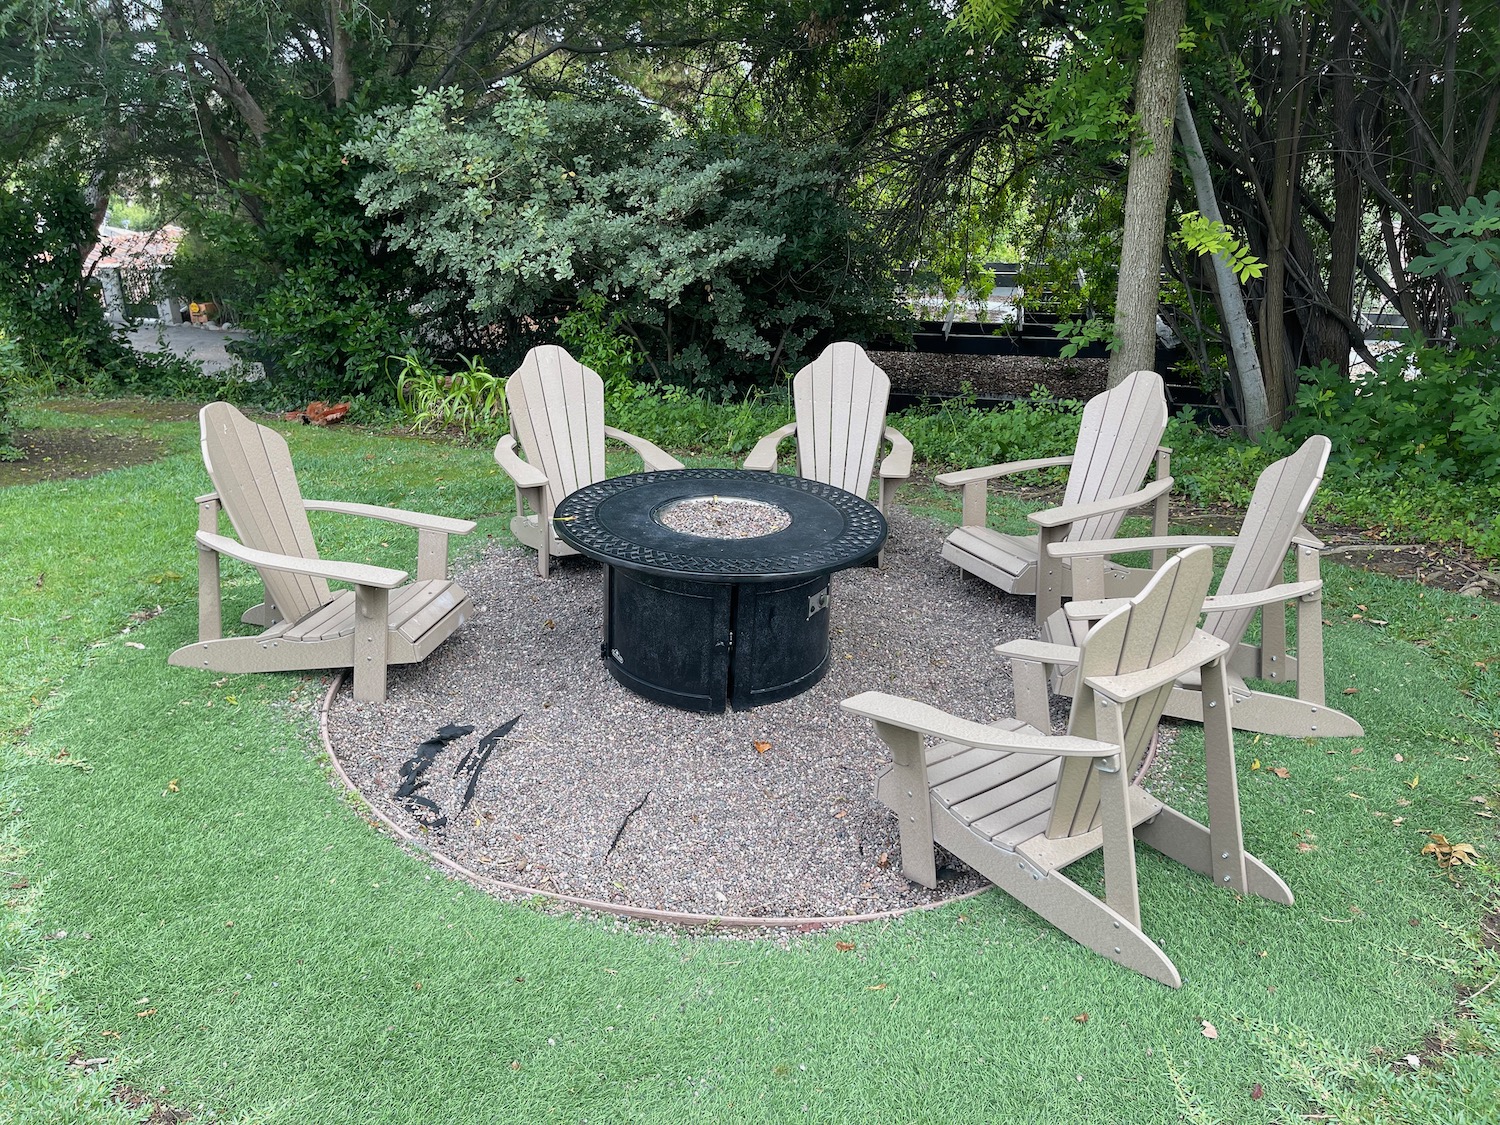 a fire pit surrounded by chairs